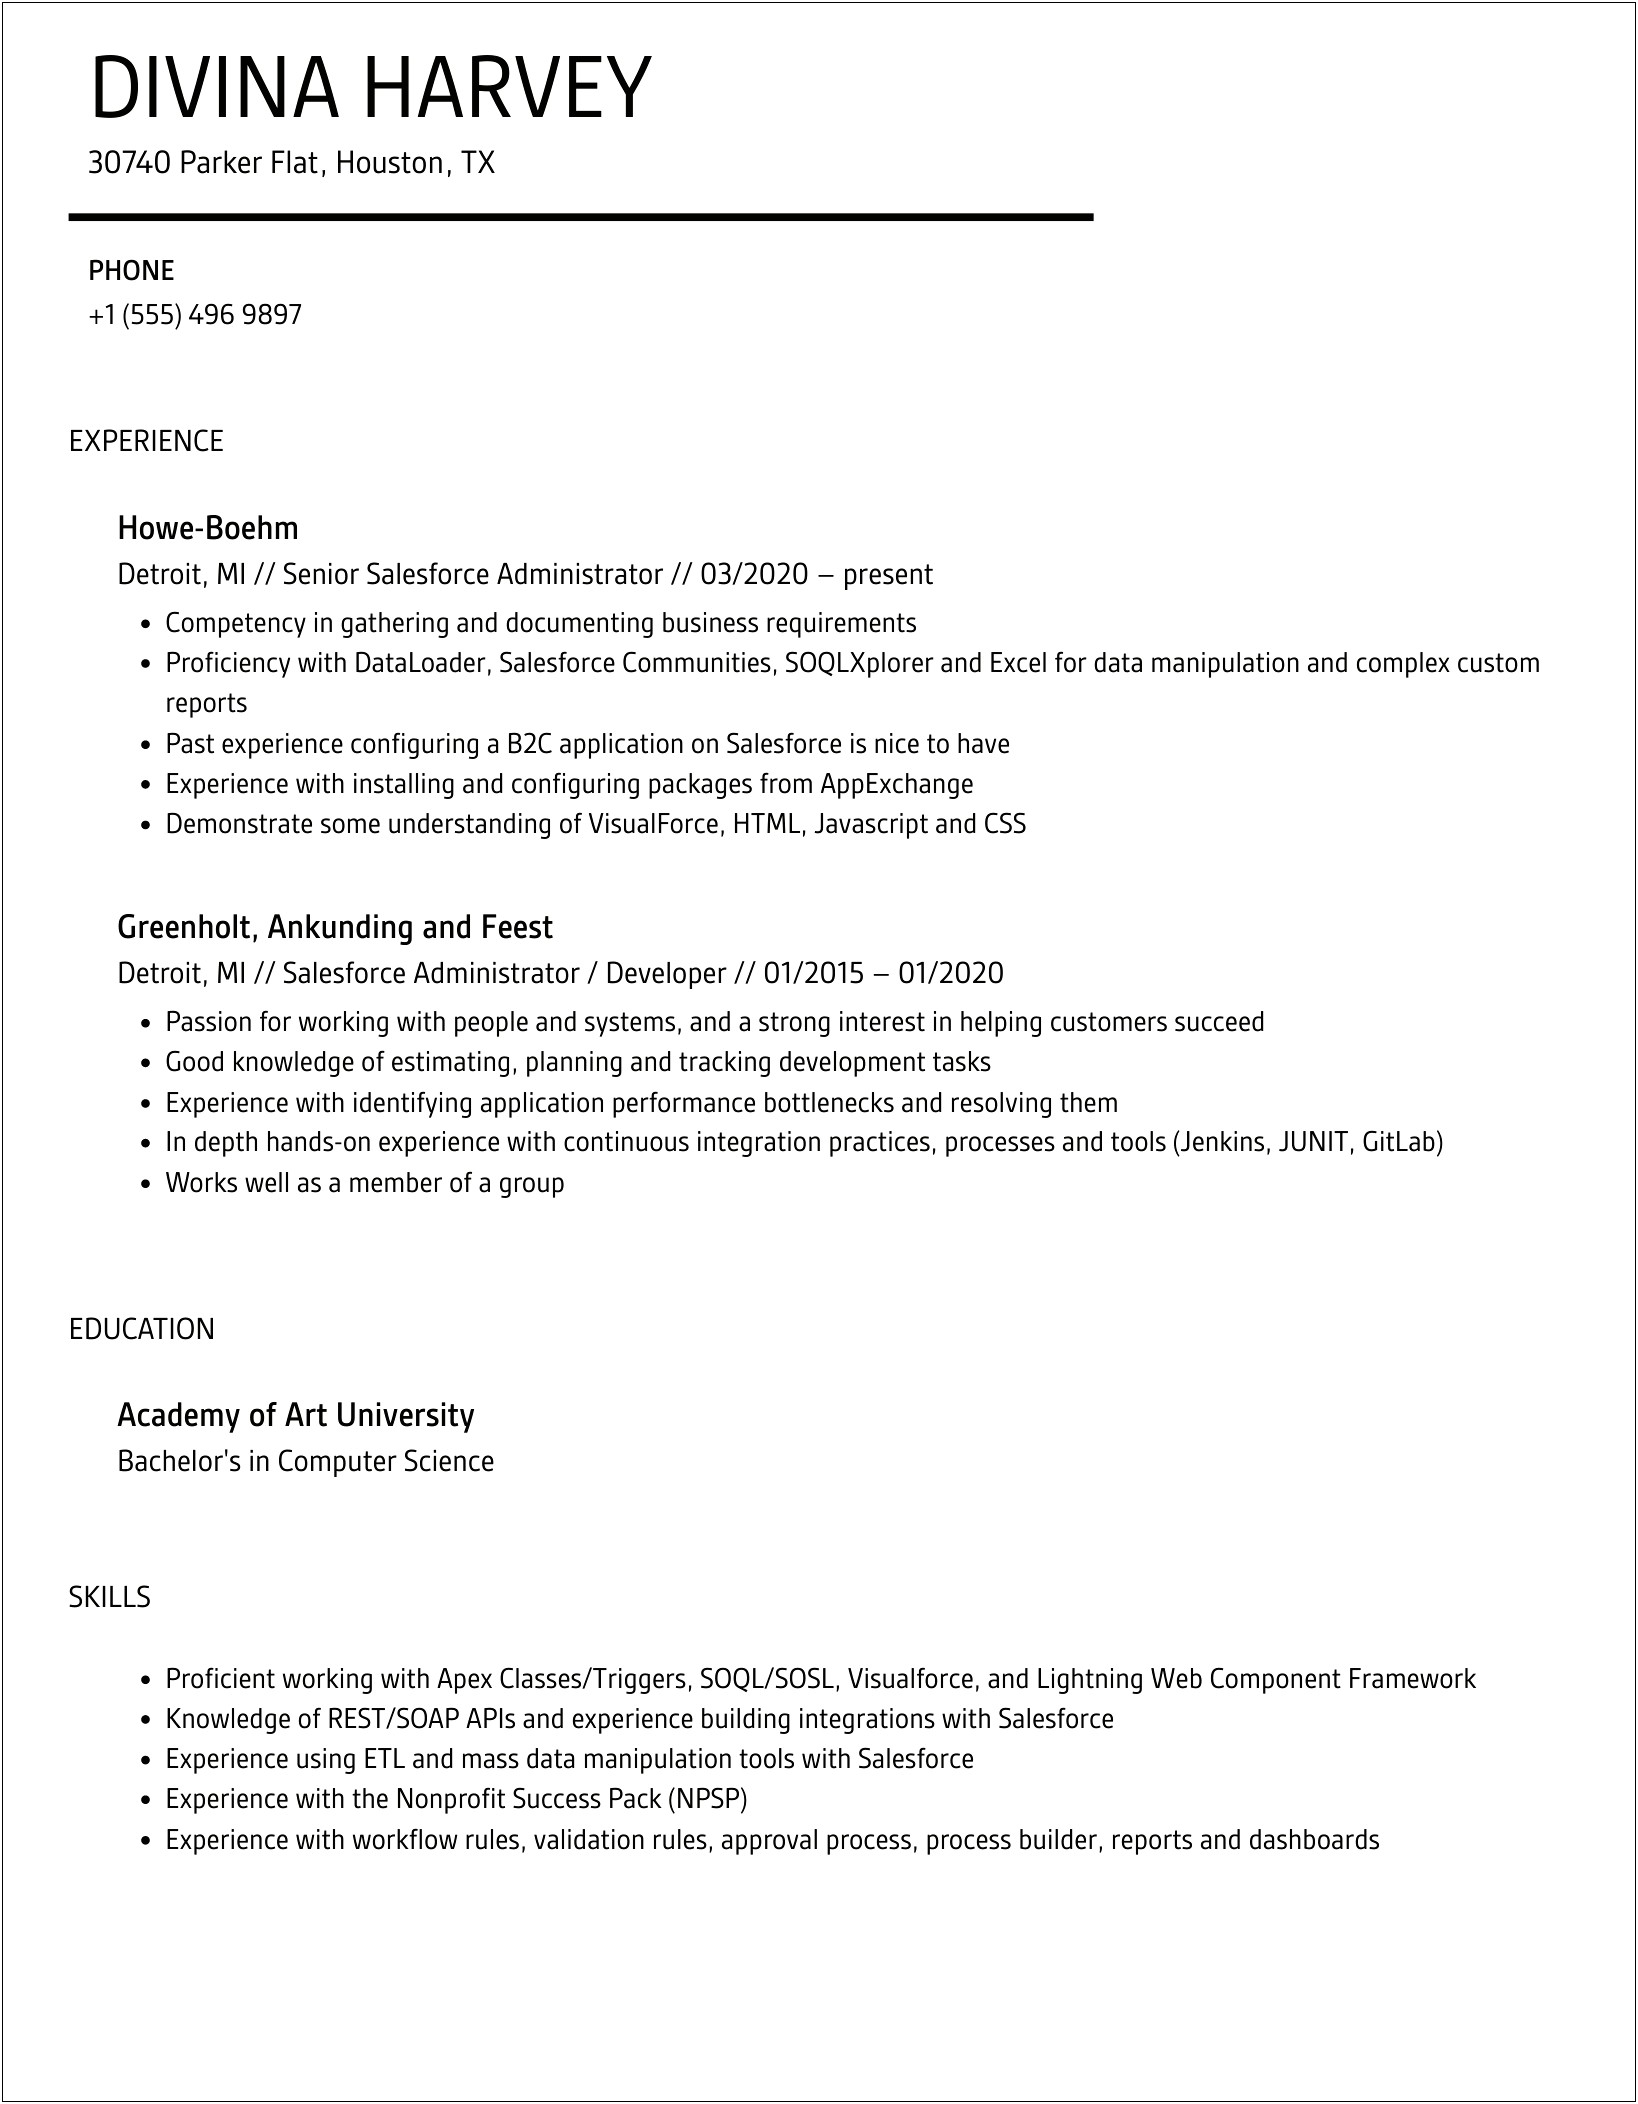 Salesforce Admin Resume For 1 Year Experience